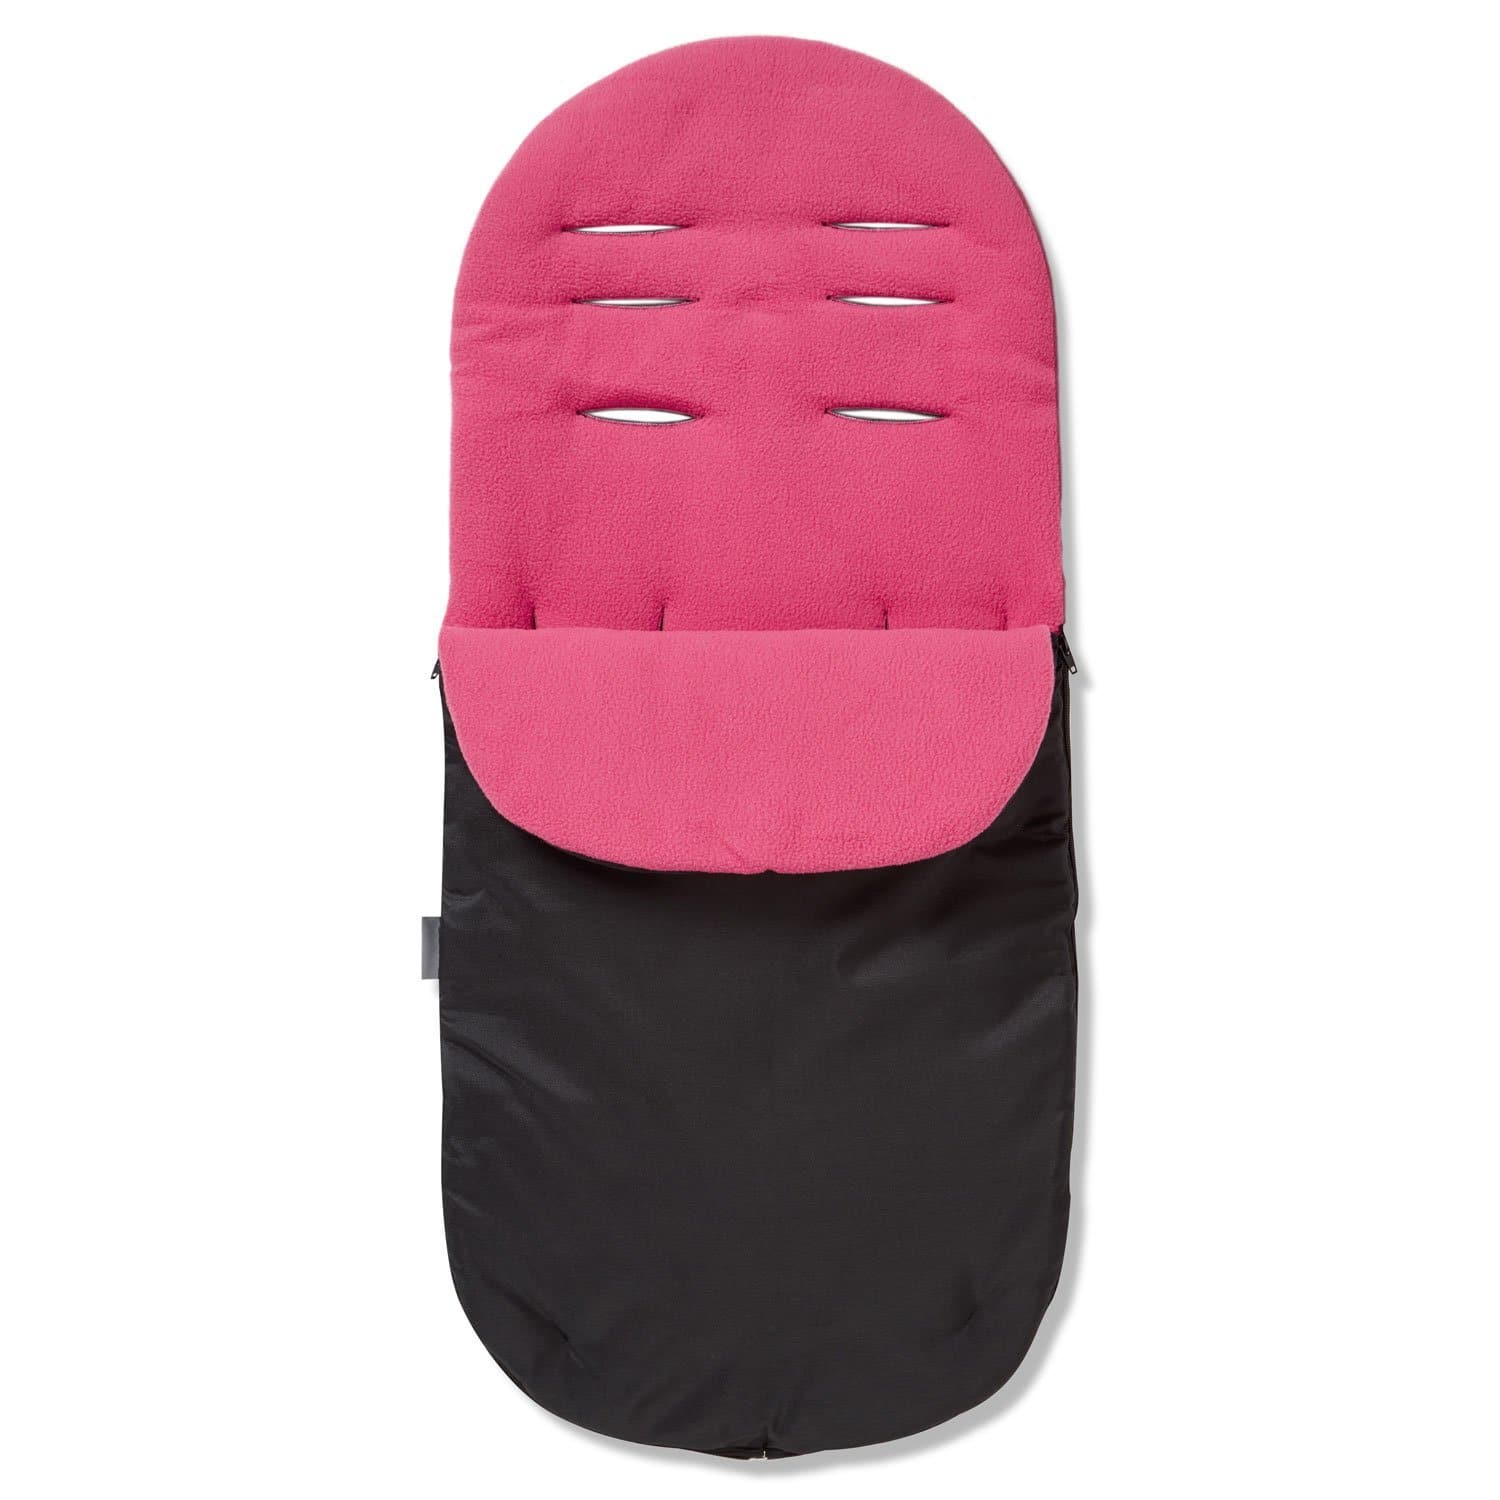 Footmuff / Cosy Toes Compatible with Inglesina - Dark Pink / Fits All Models | For Your Little One